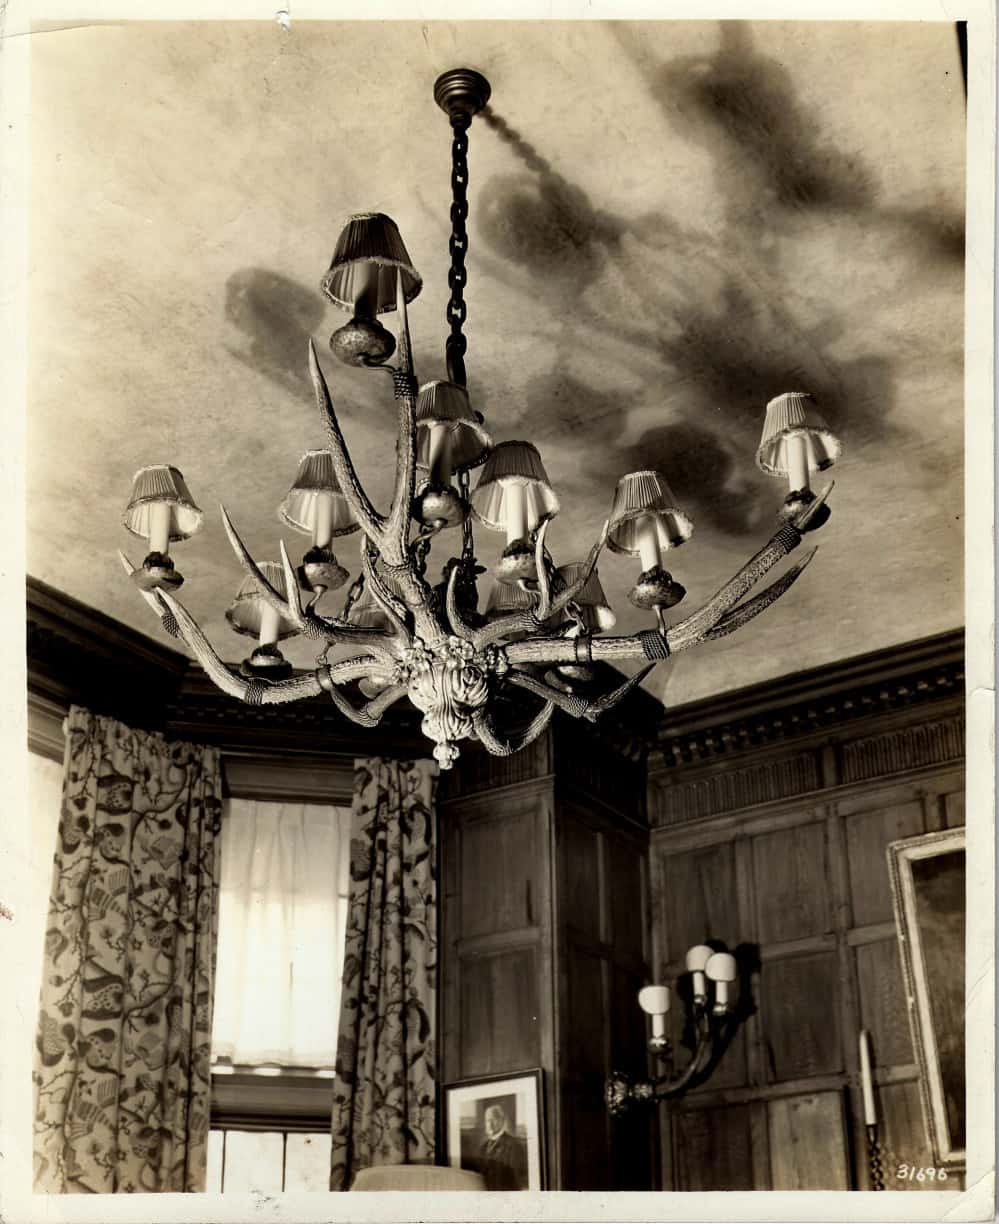 Cyril Colnik Antler chandelier in the Pabst Mansion, Milwaukee.